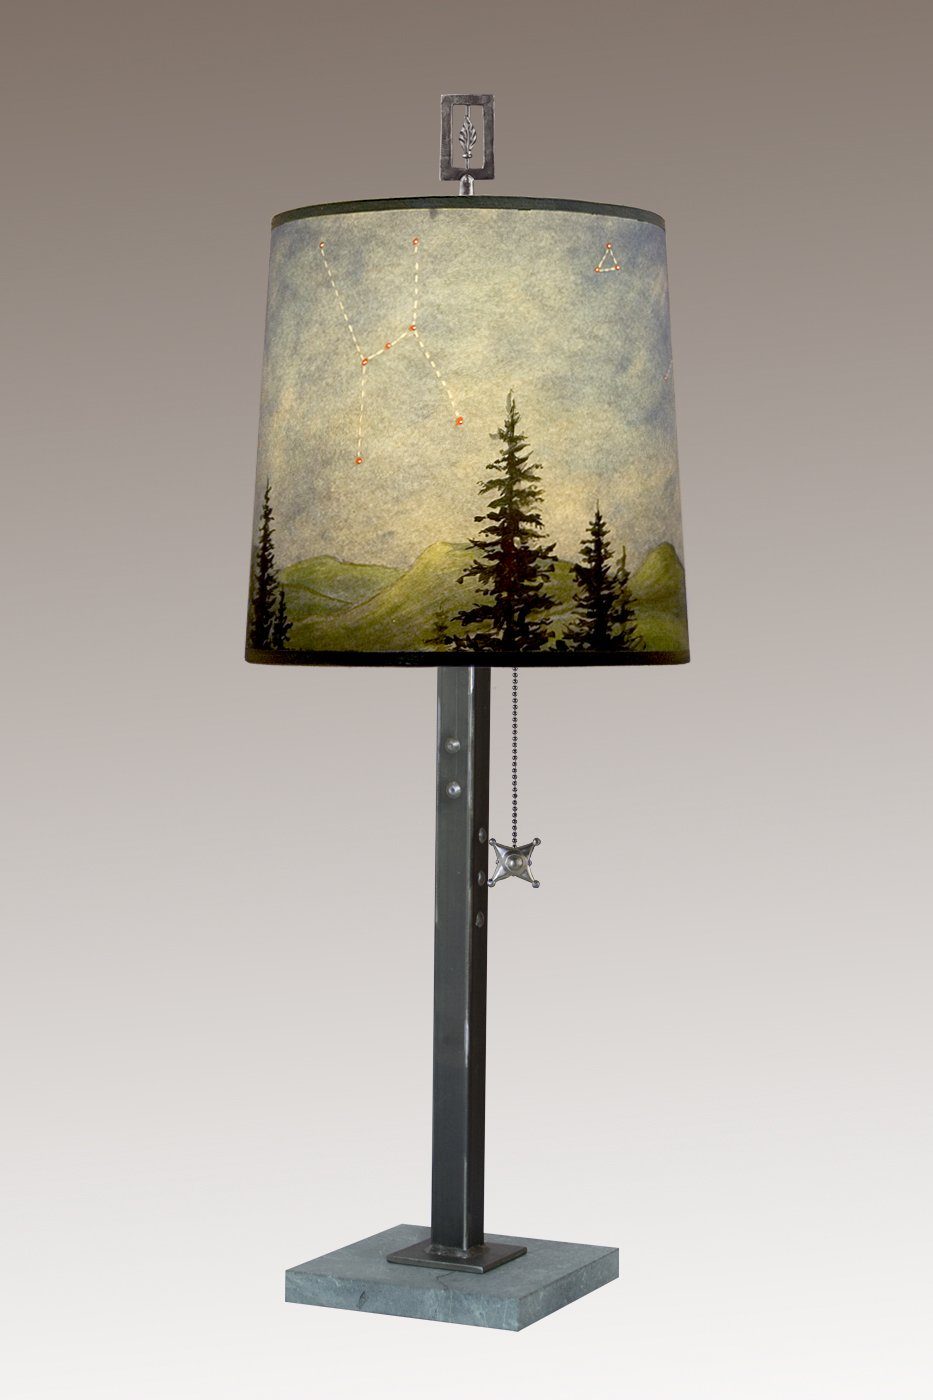 Janna Ugone & Co Table Lamps Steel Table Lamp with Medium Drum Shade in Midnight Sky